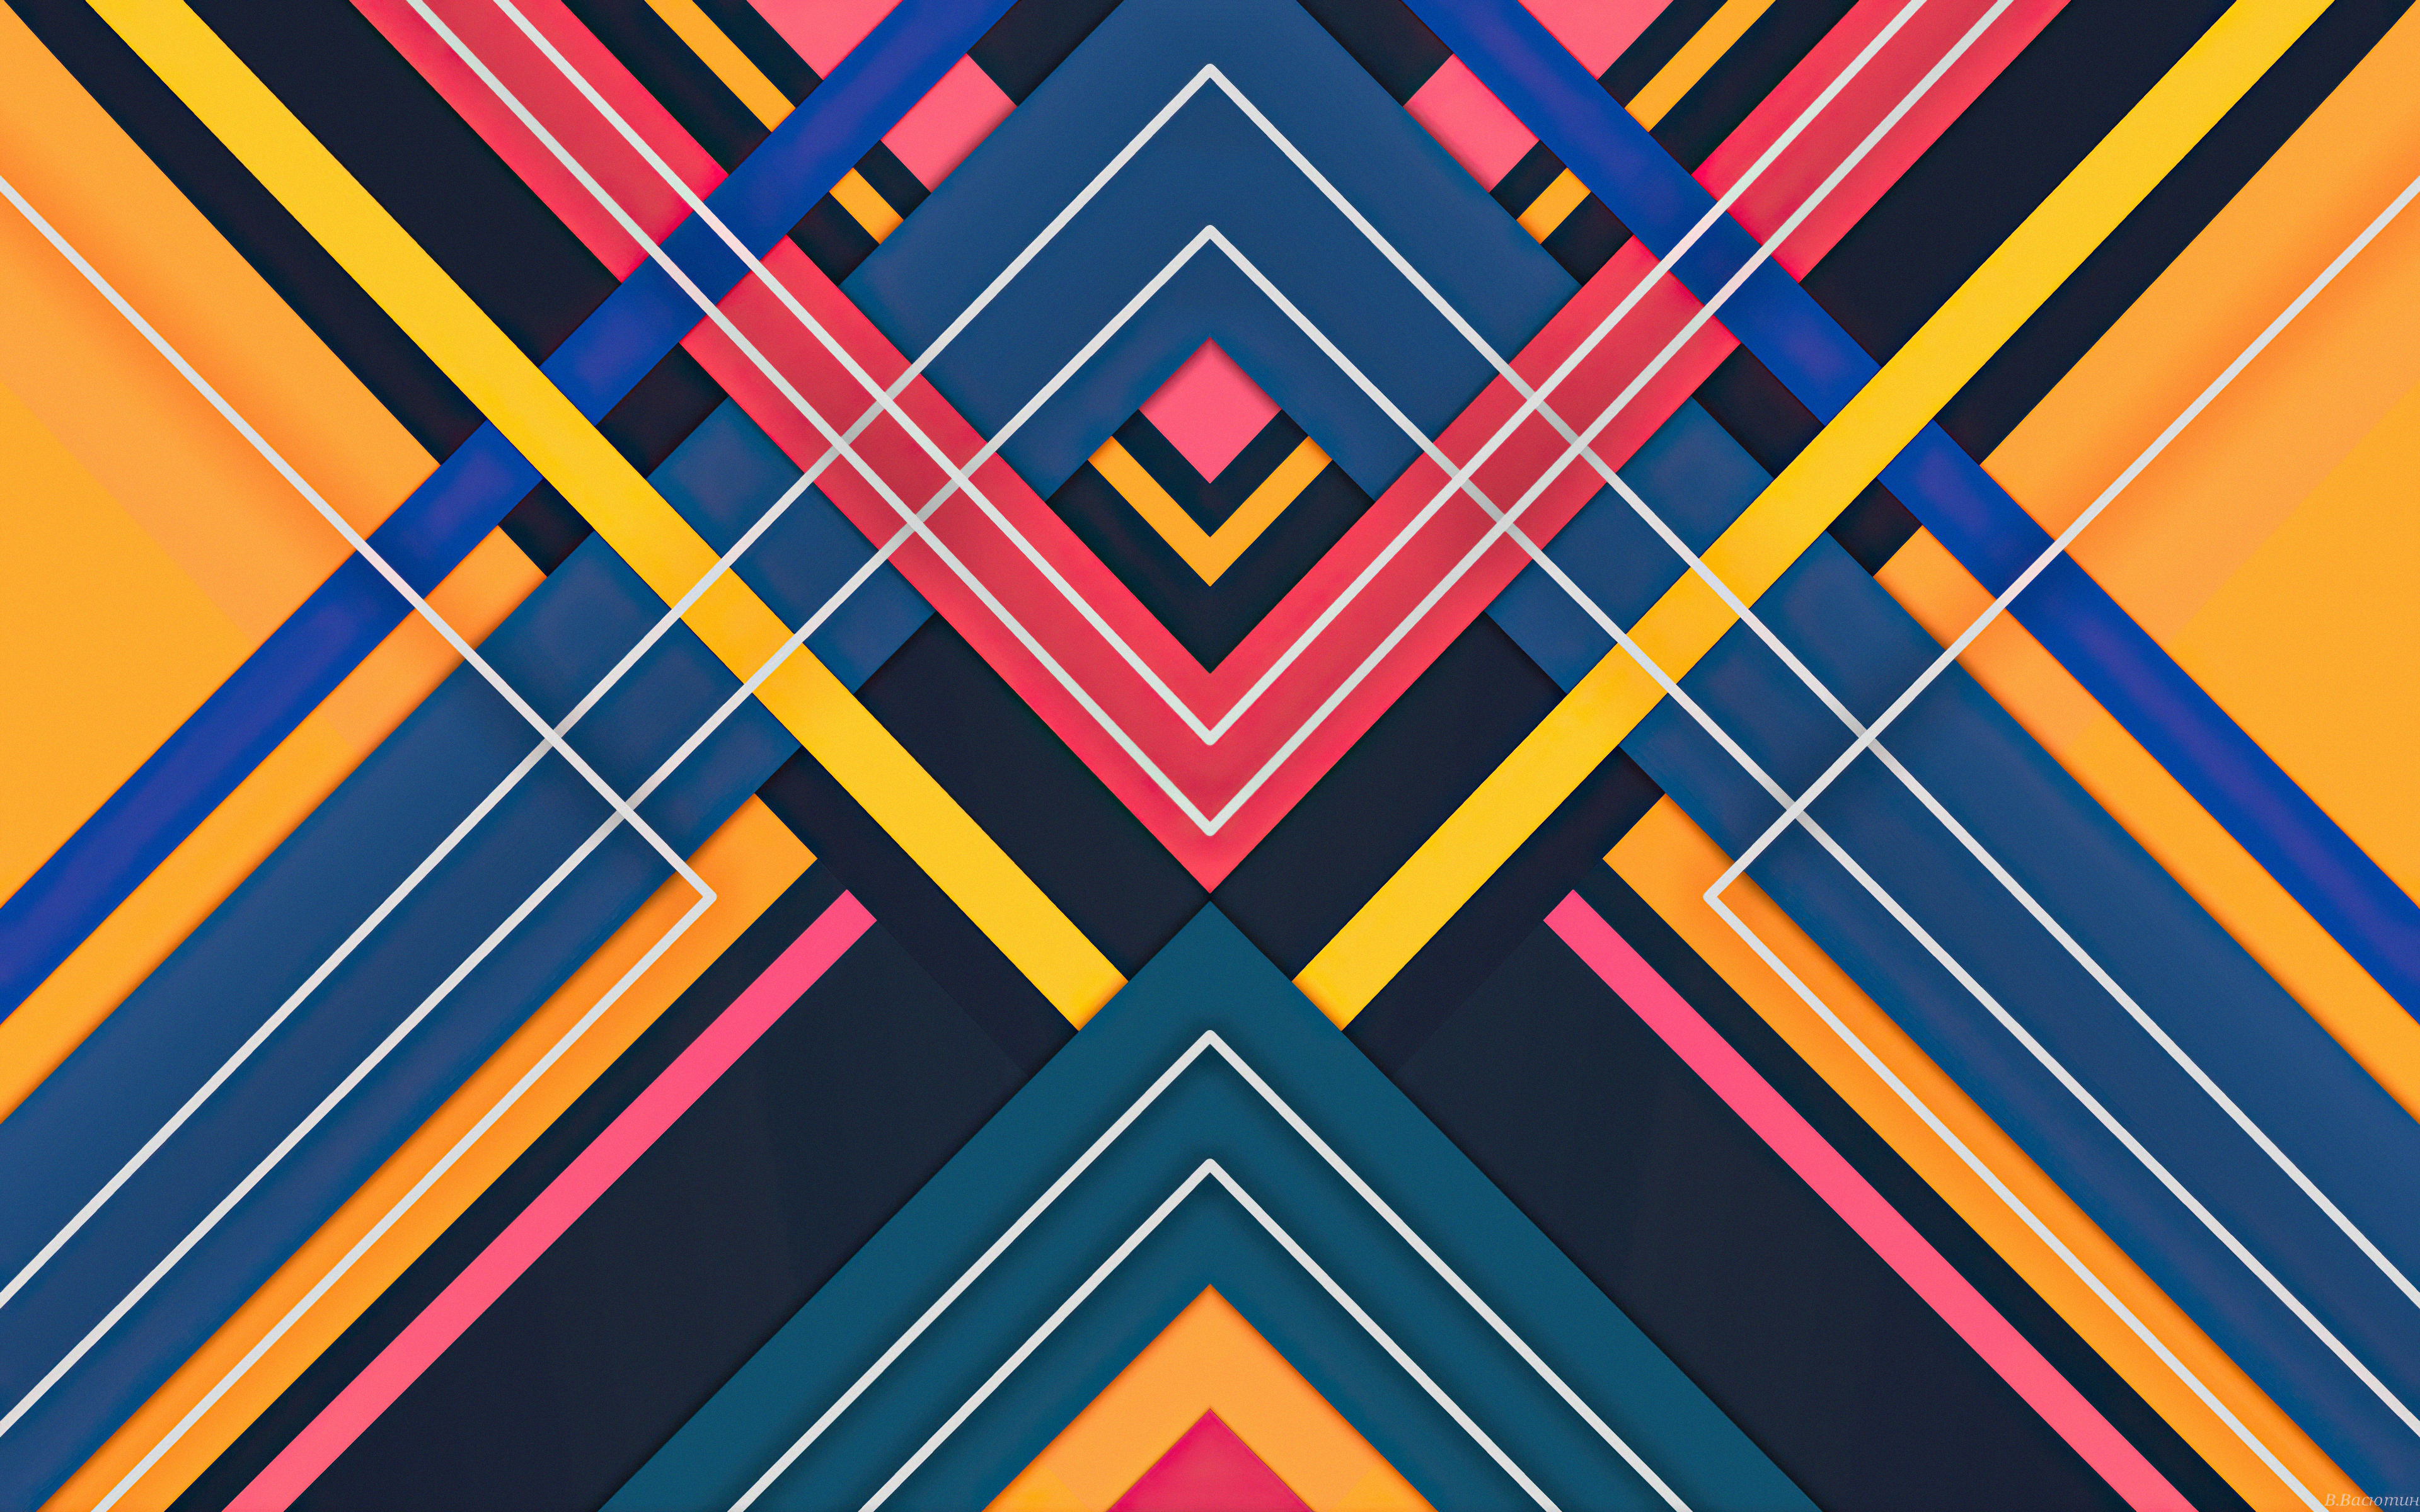 Geometry Patterns 4k Wallpaper, HD Abstract Wallpaper, 4k Wallpaper, Image, Background, Photos and Picture